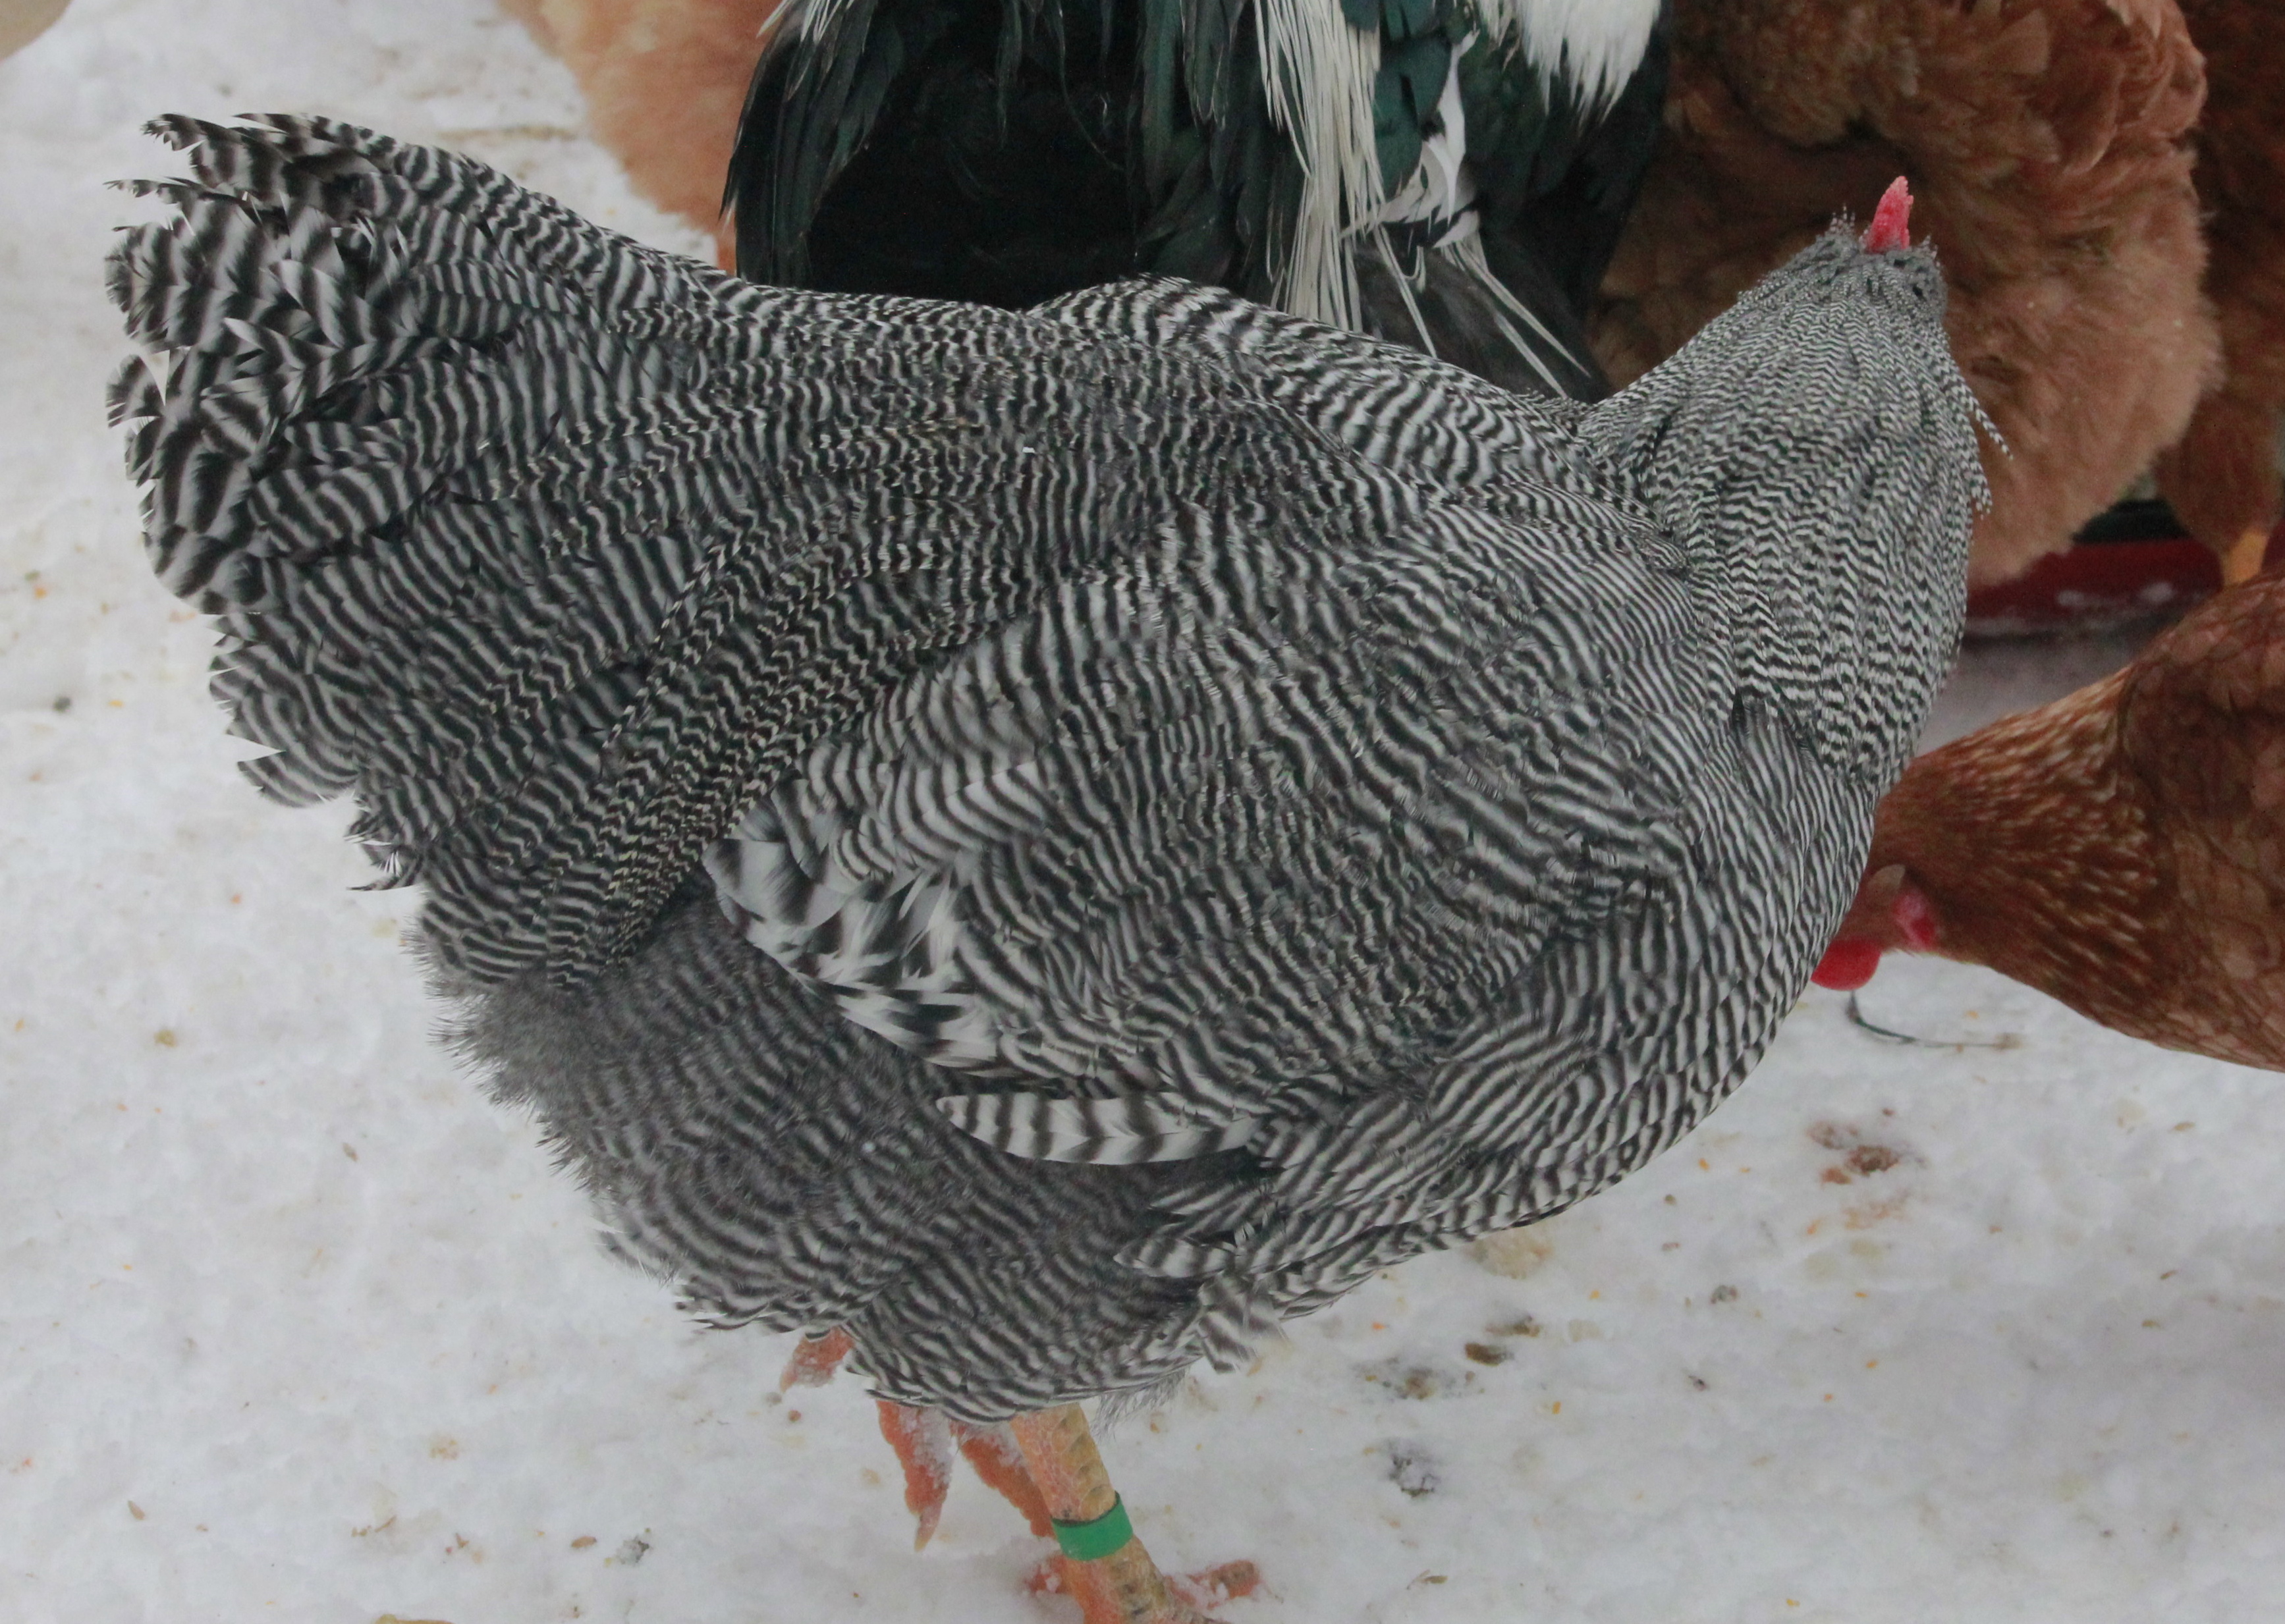 Gatsby, our 2014 breeding Barred Plymouth Rock #1 choice. He is 26 weeks old here. Hatched June 28th 2013